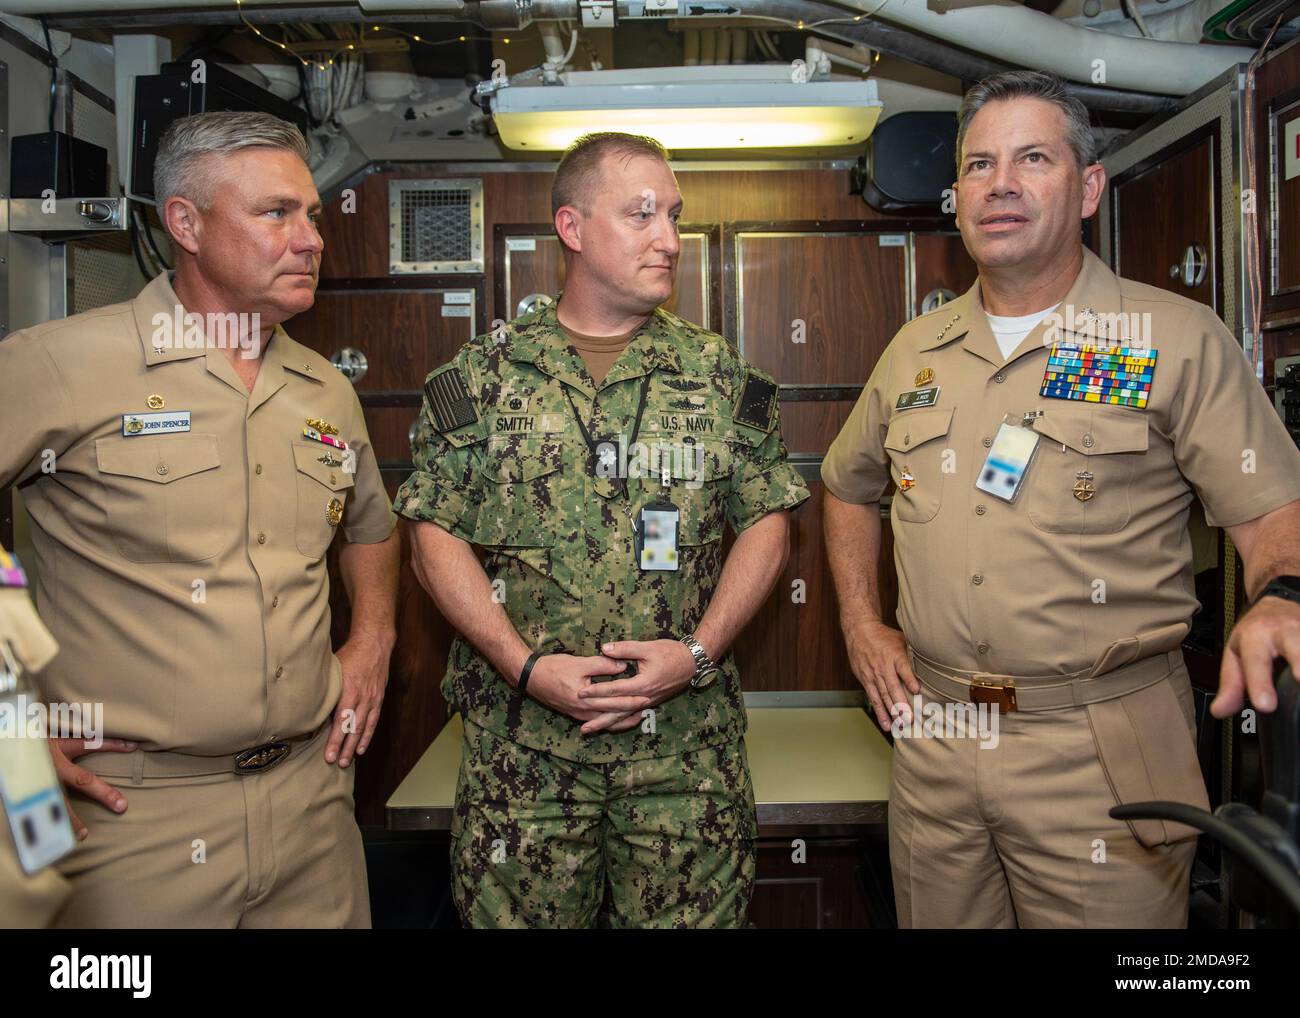 KINGS BAY, Ga. (July. 14, 2022) Rear Adm. John Spencer, Commander, Submarine Group Ten (left) and Cmdr. John Smith, commanding officer of USS Alaska (SSBN 732) Blue Crew (center), brief Vice Adm. Juan Ricardo Rozo, Commander, Caribbean Naval Force, on the capabilities of Ohio-class ballistic-missile submarines. The visit is part of the Diesel Electric Submarine Initiative (DESI) between the United States and partner nations. DESI is a program designed to train crews and test capabilities in Anti-Submarine Warfare between nuclear-powered and diesel-electric submarines. Stock Photo